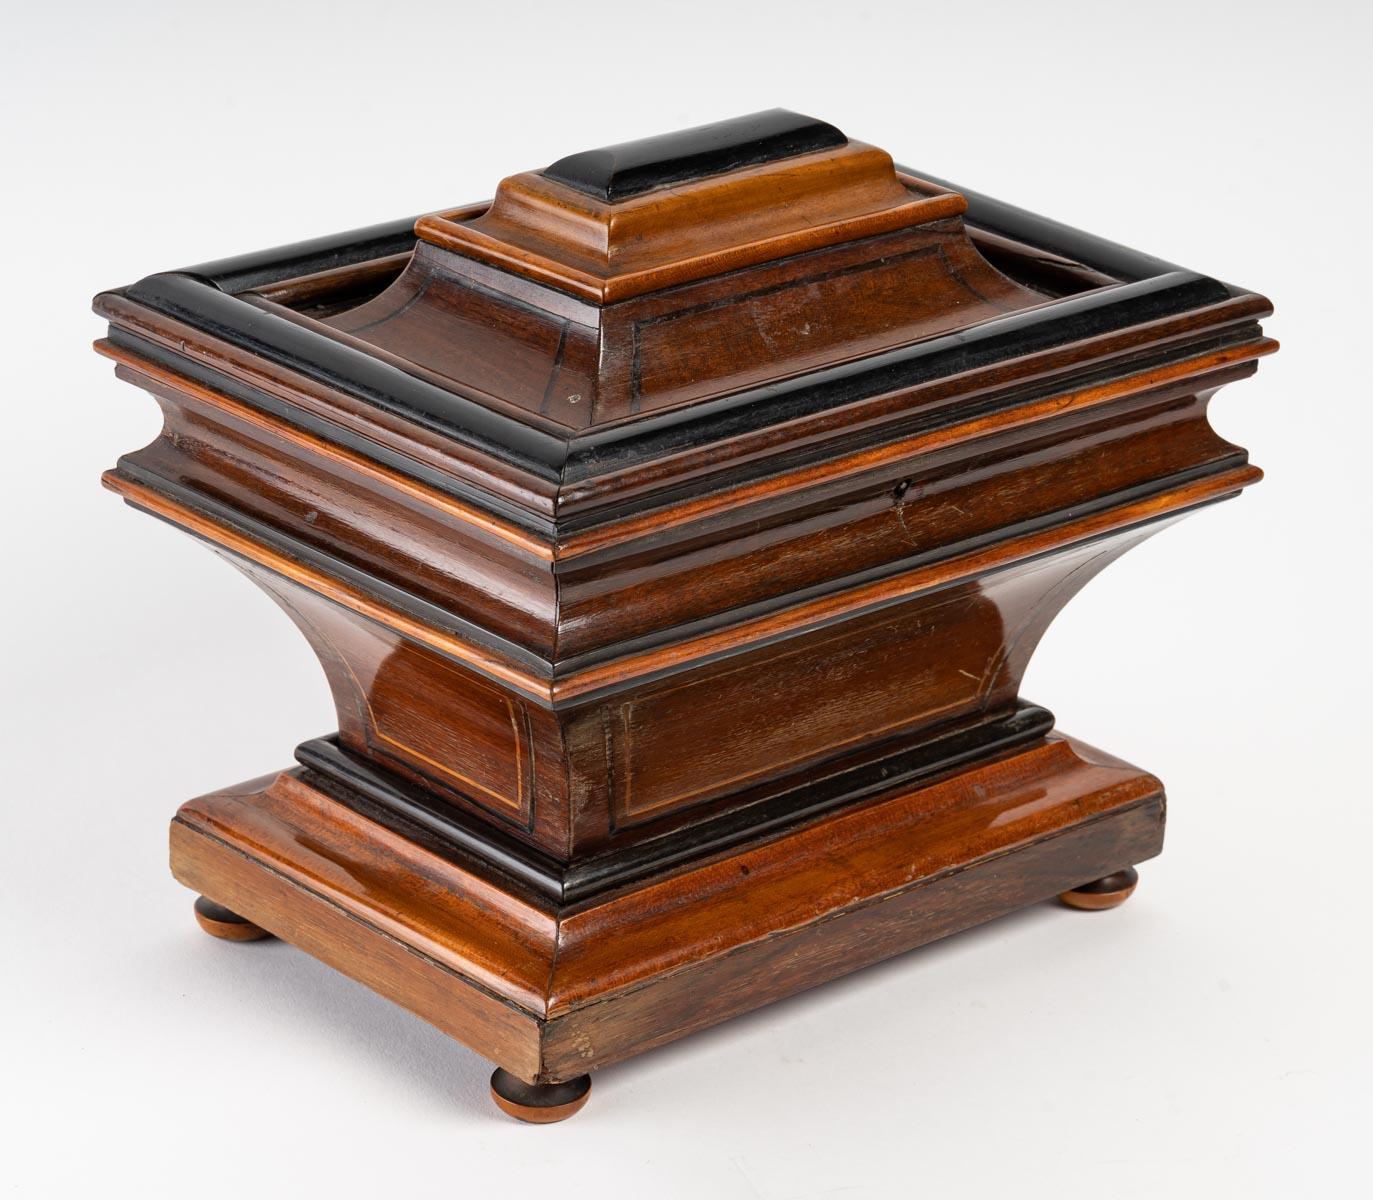 Wooden box in Charles X style from the 19th century.
Measures: H 22 cm, W 24 cm, D 19 cm.